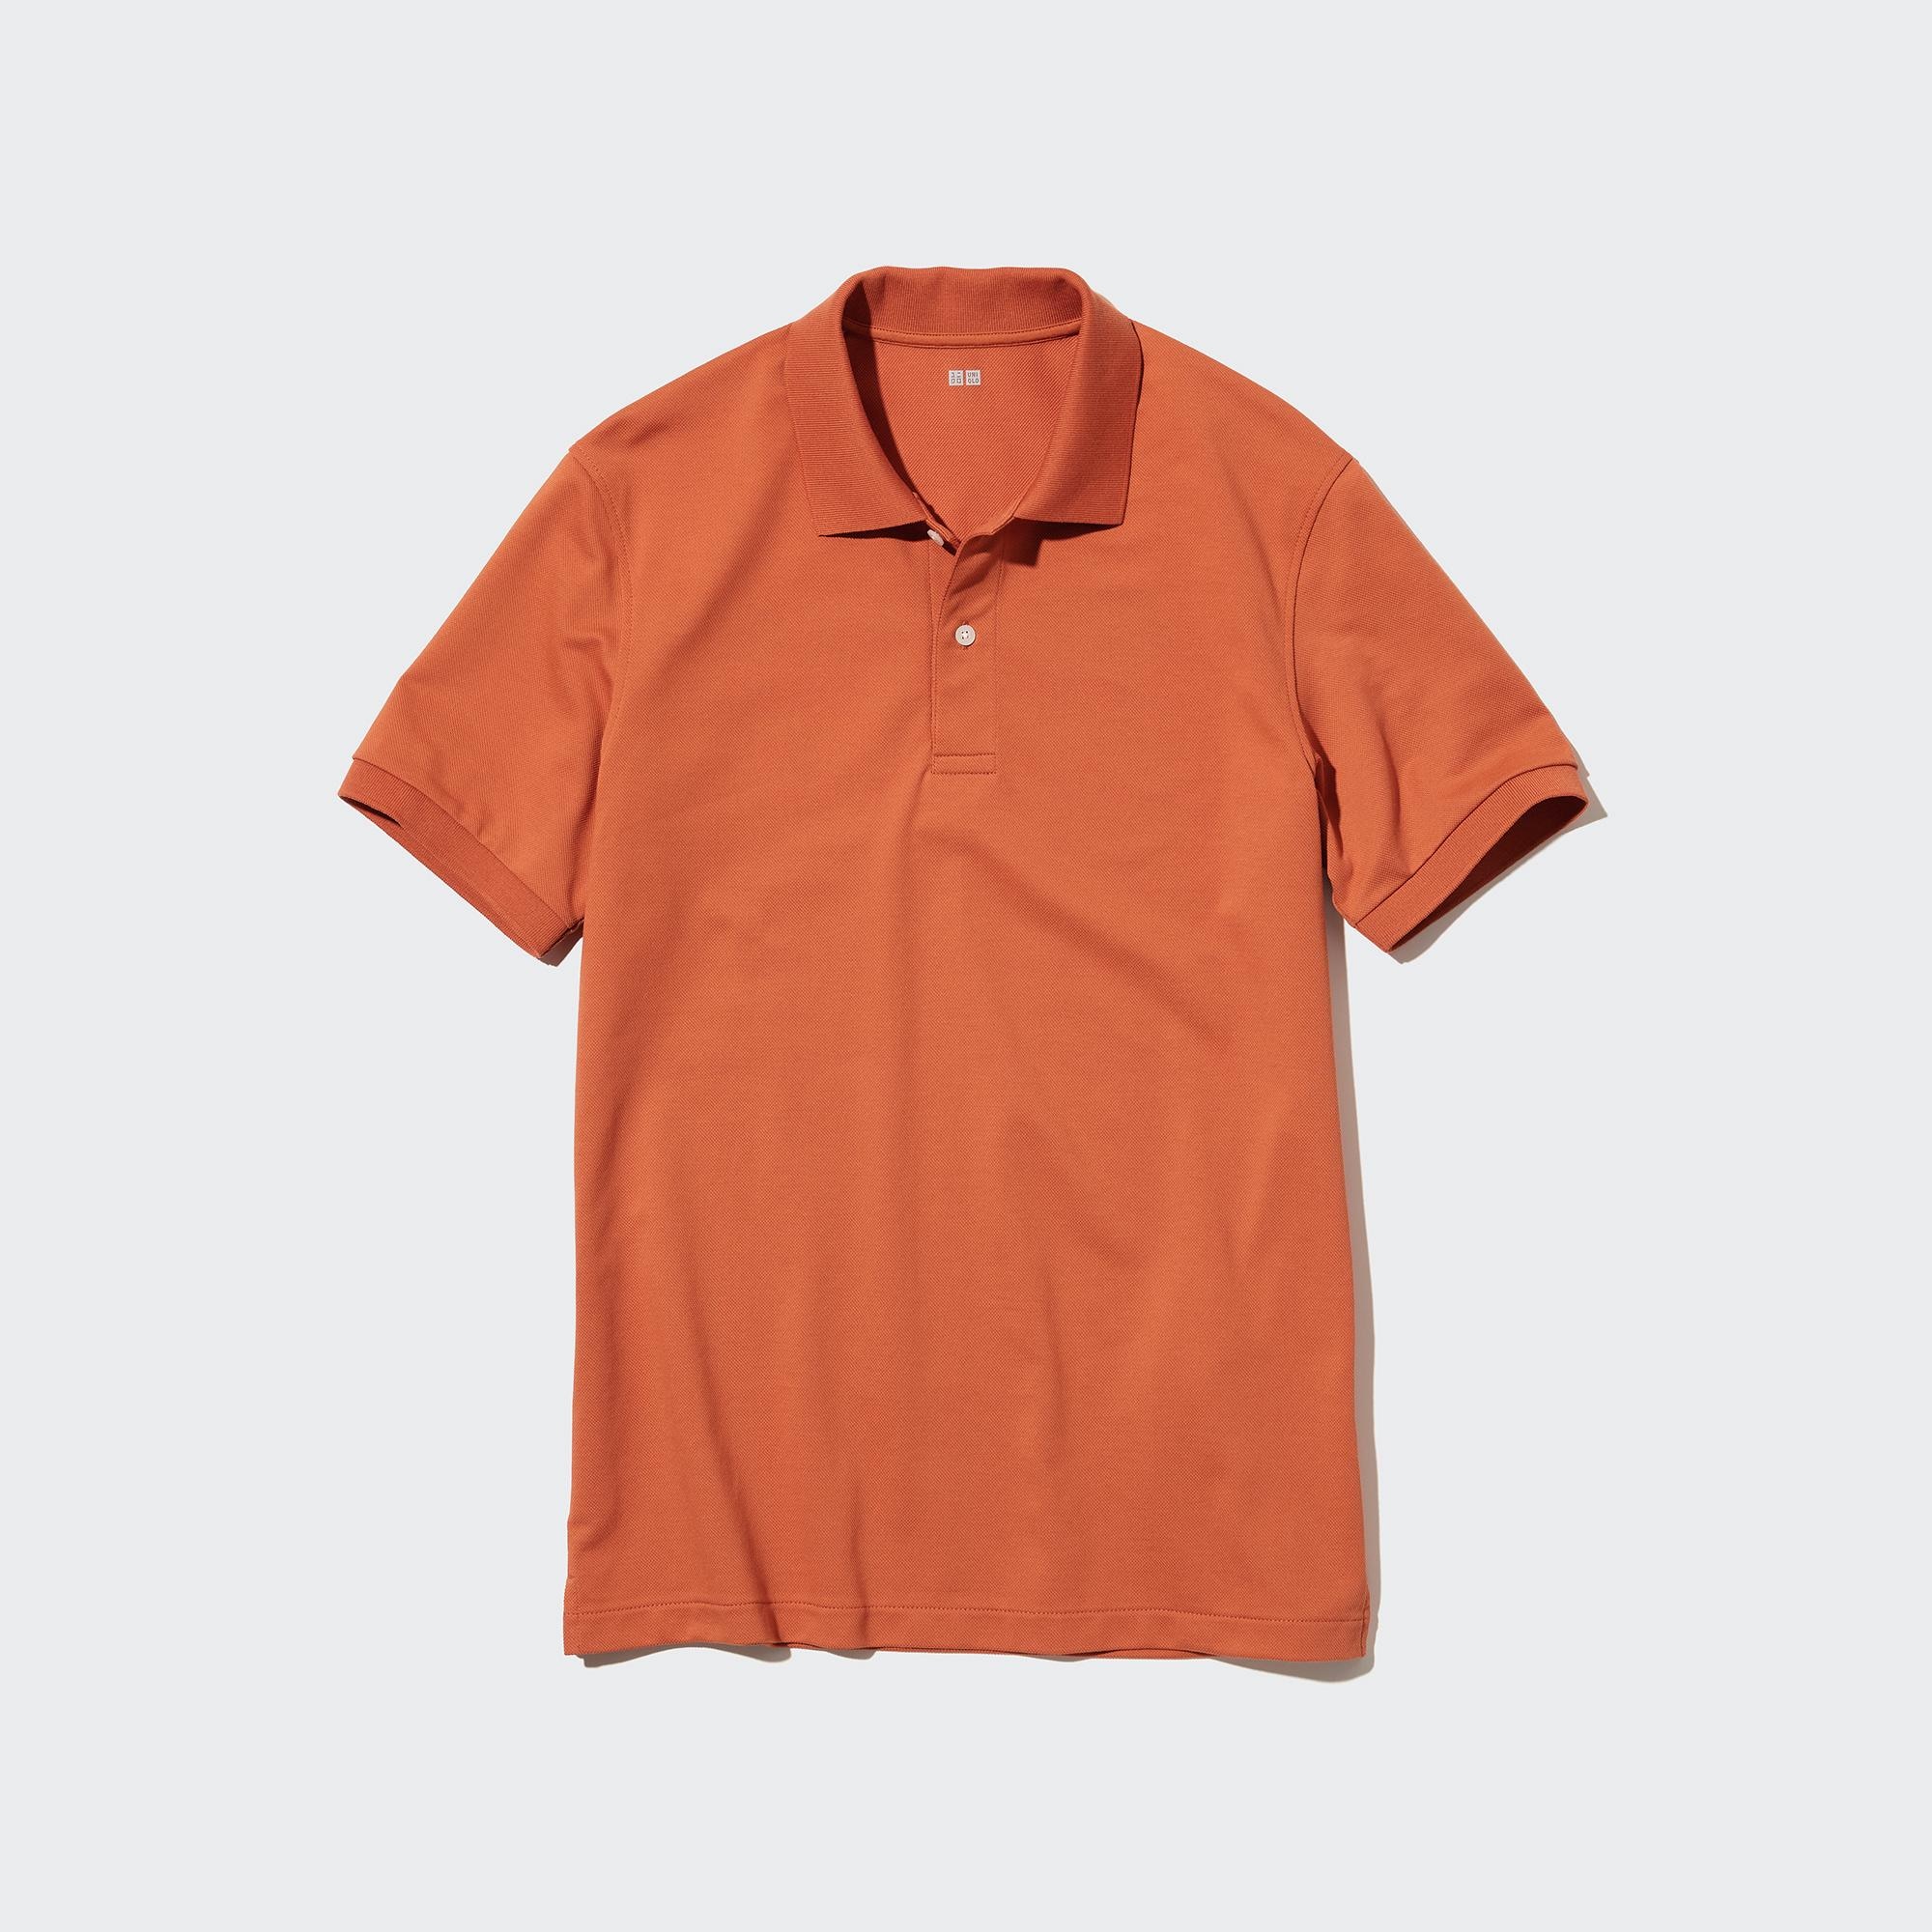 Check styling ideas for「Dry Pique Short Sleeve Polo Shirt